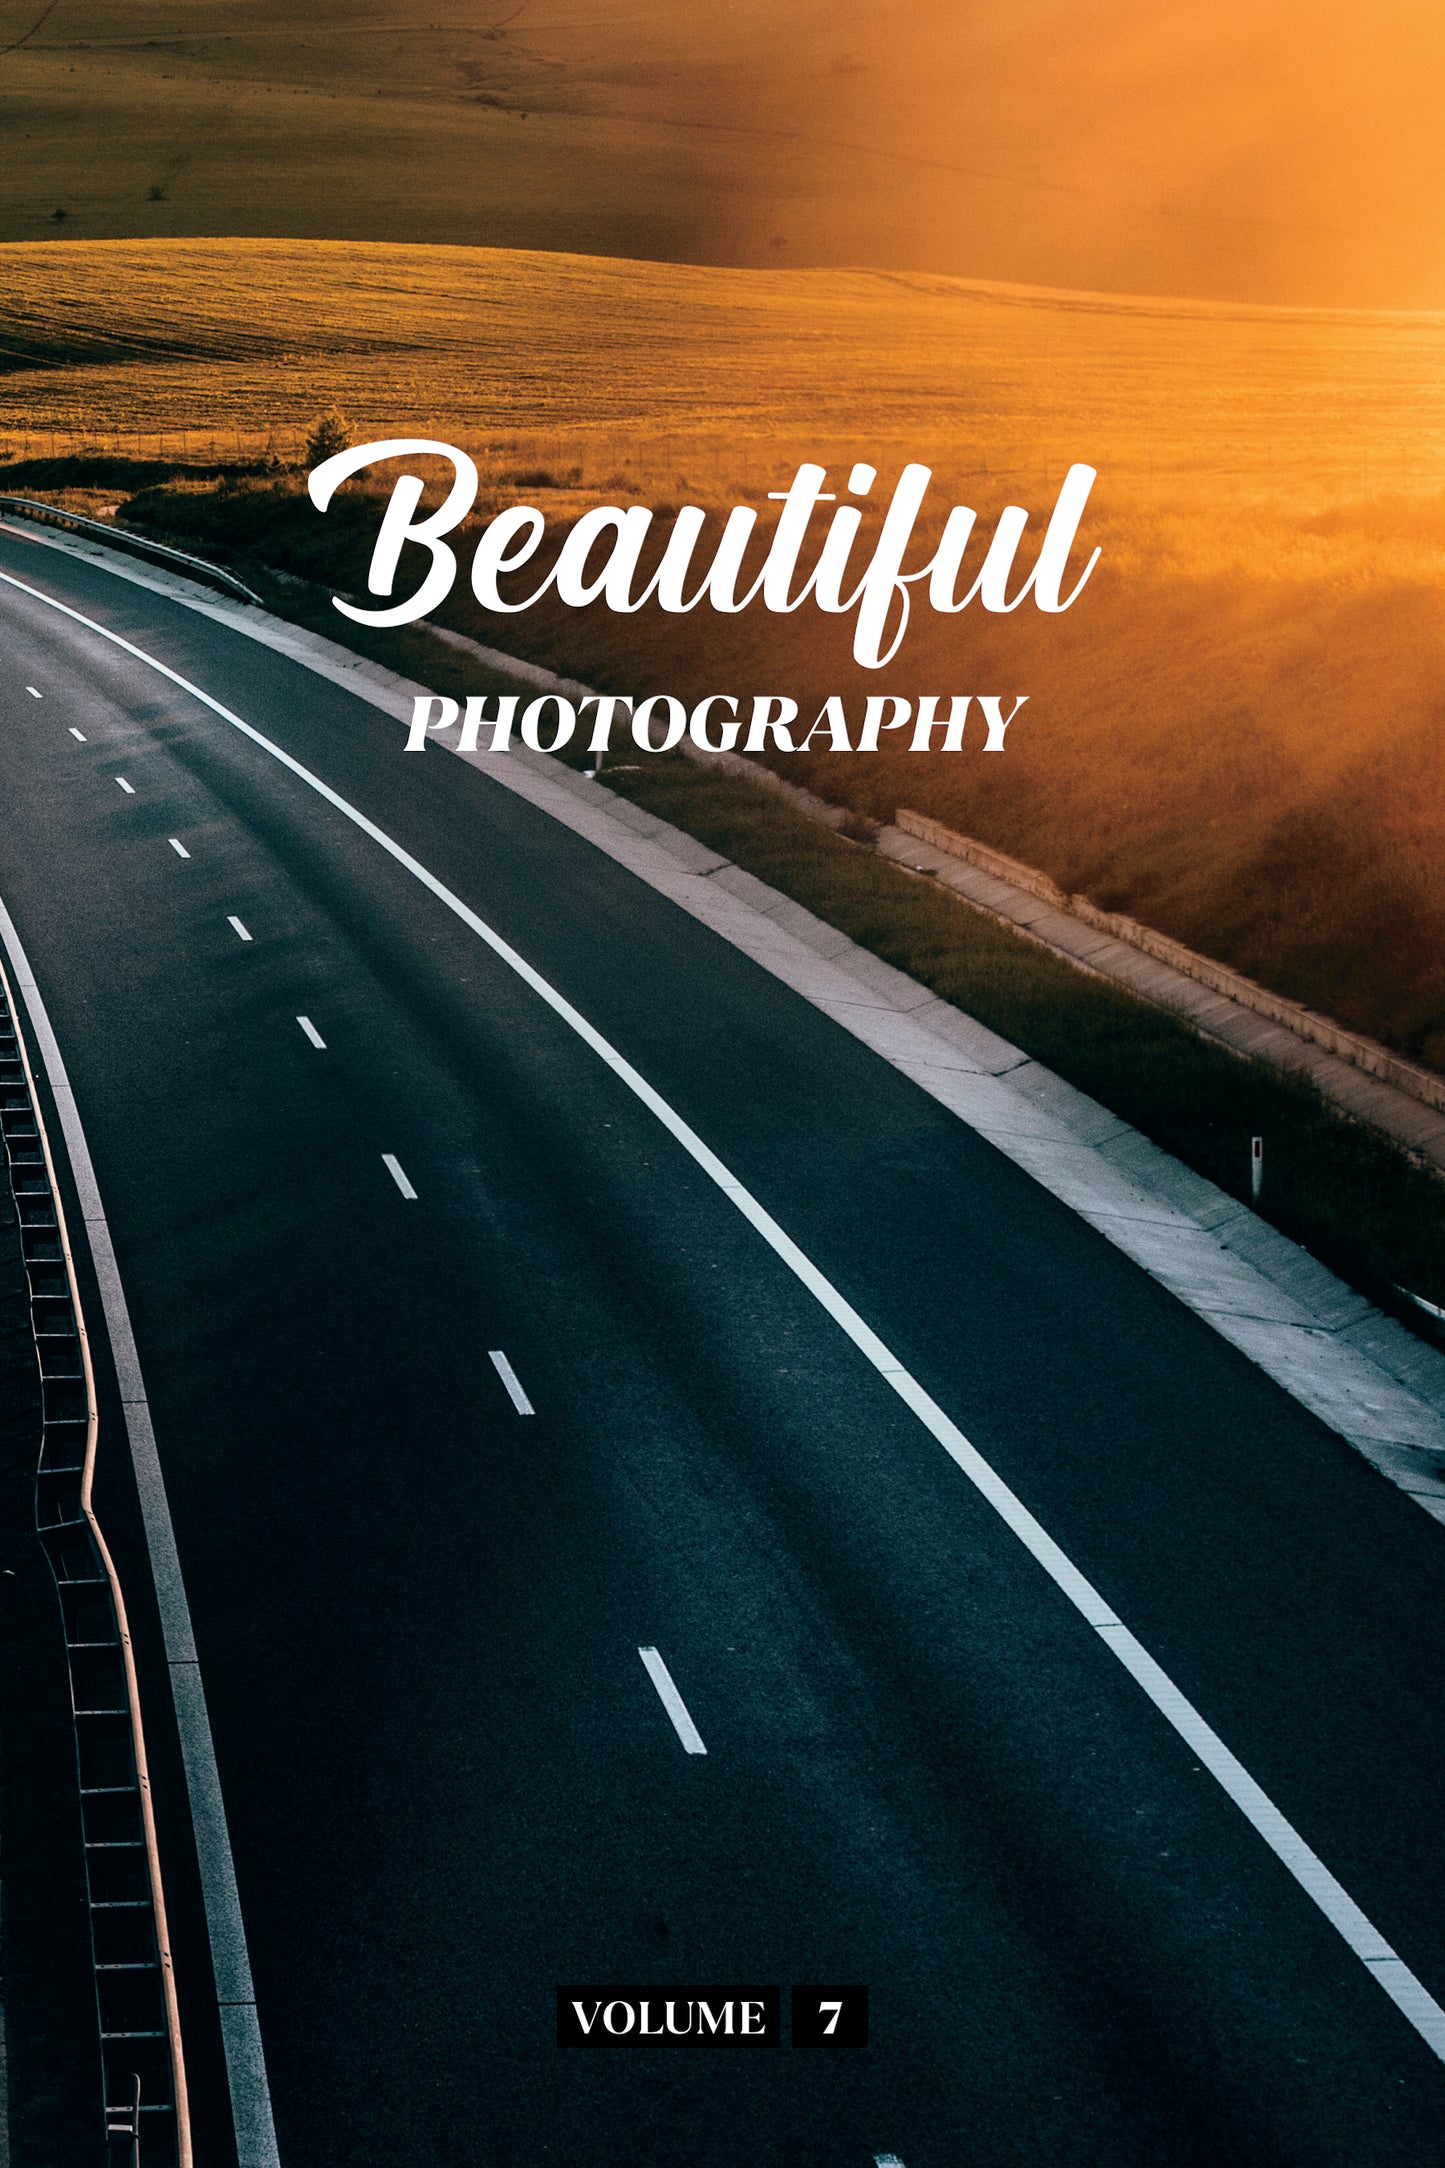 Beautiful Photography Volume 7 (Physical Book)